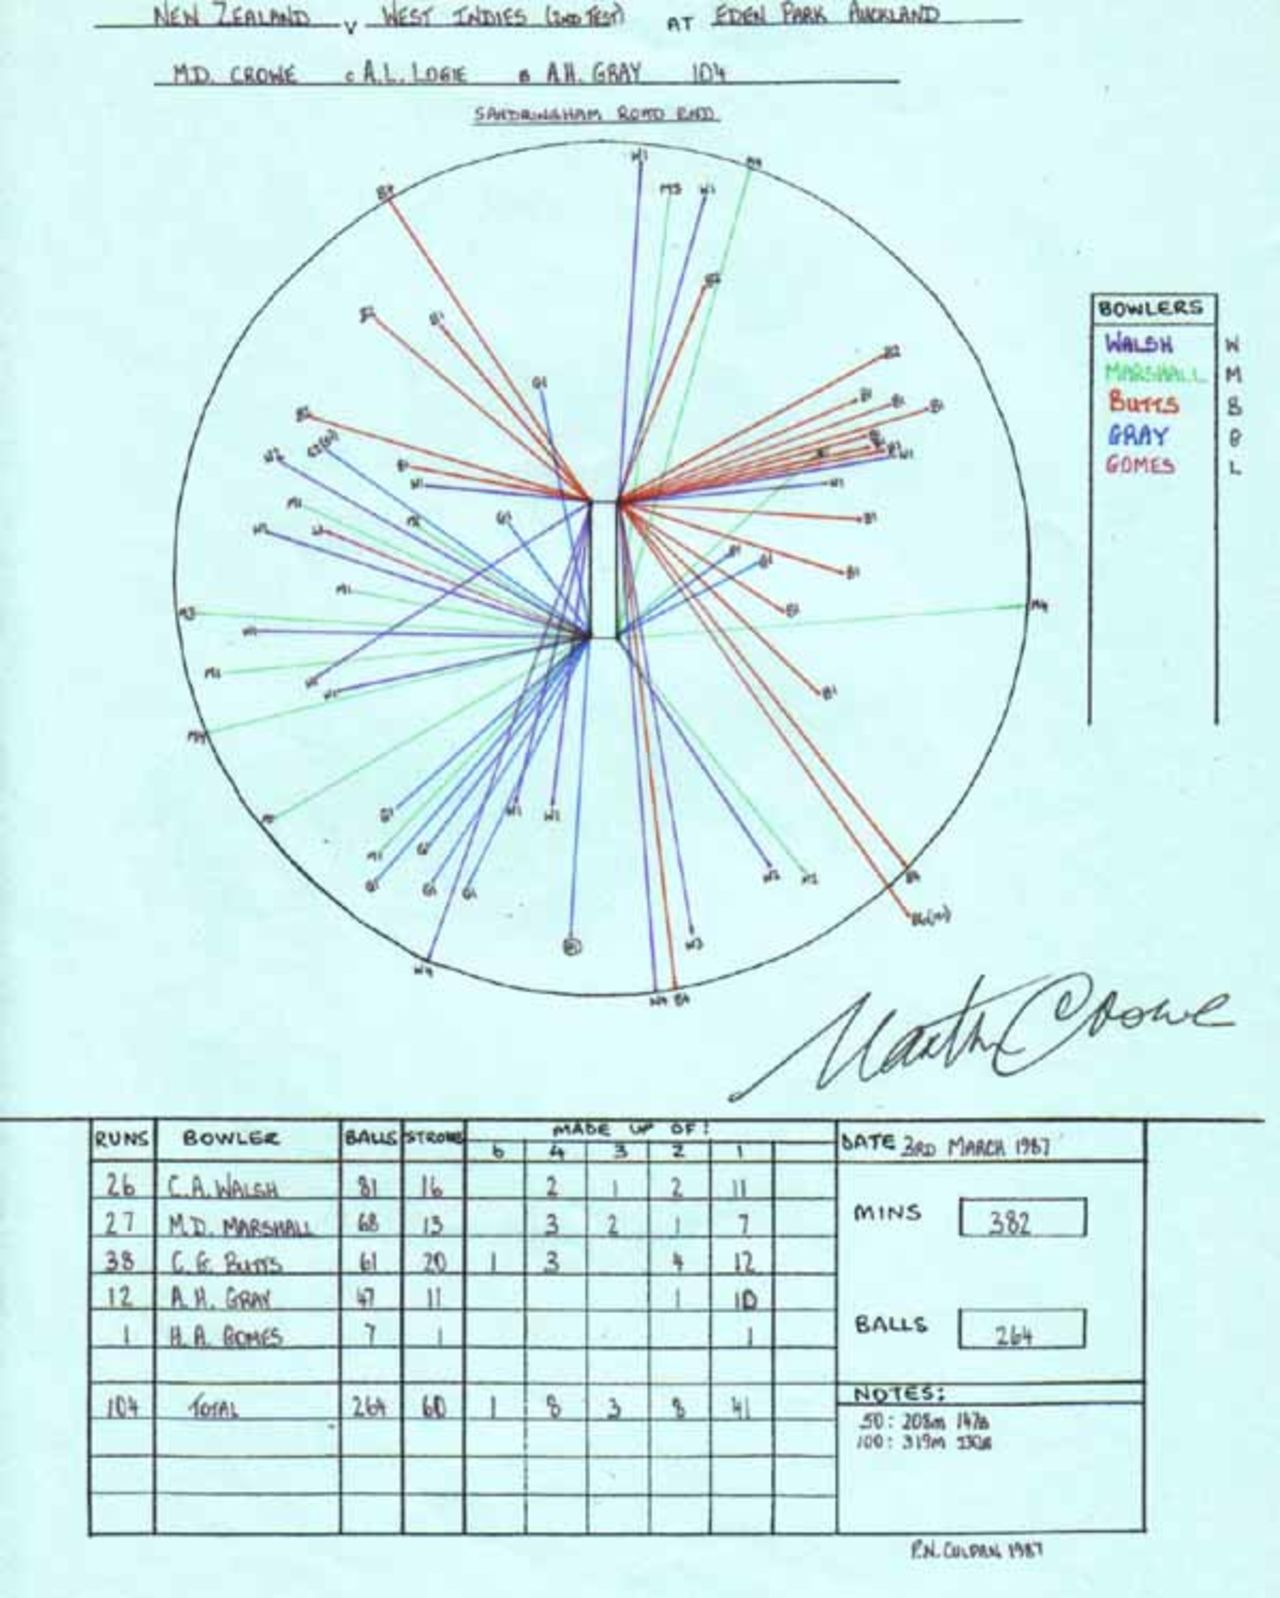 Wagon Wheel of Martin Crowe's 104 v West Indies, Eden Park, Auckland 3rd March 1987